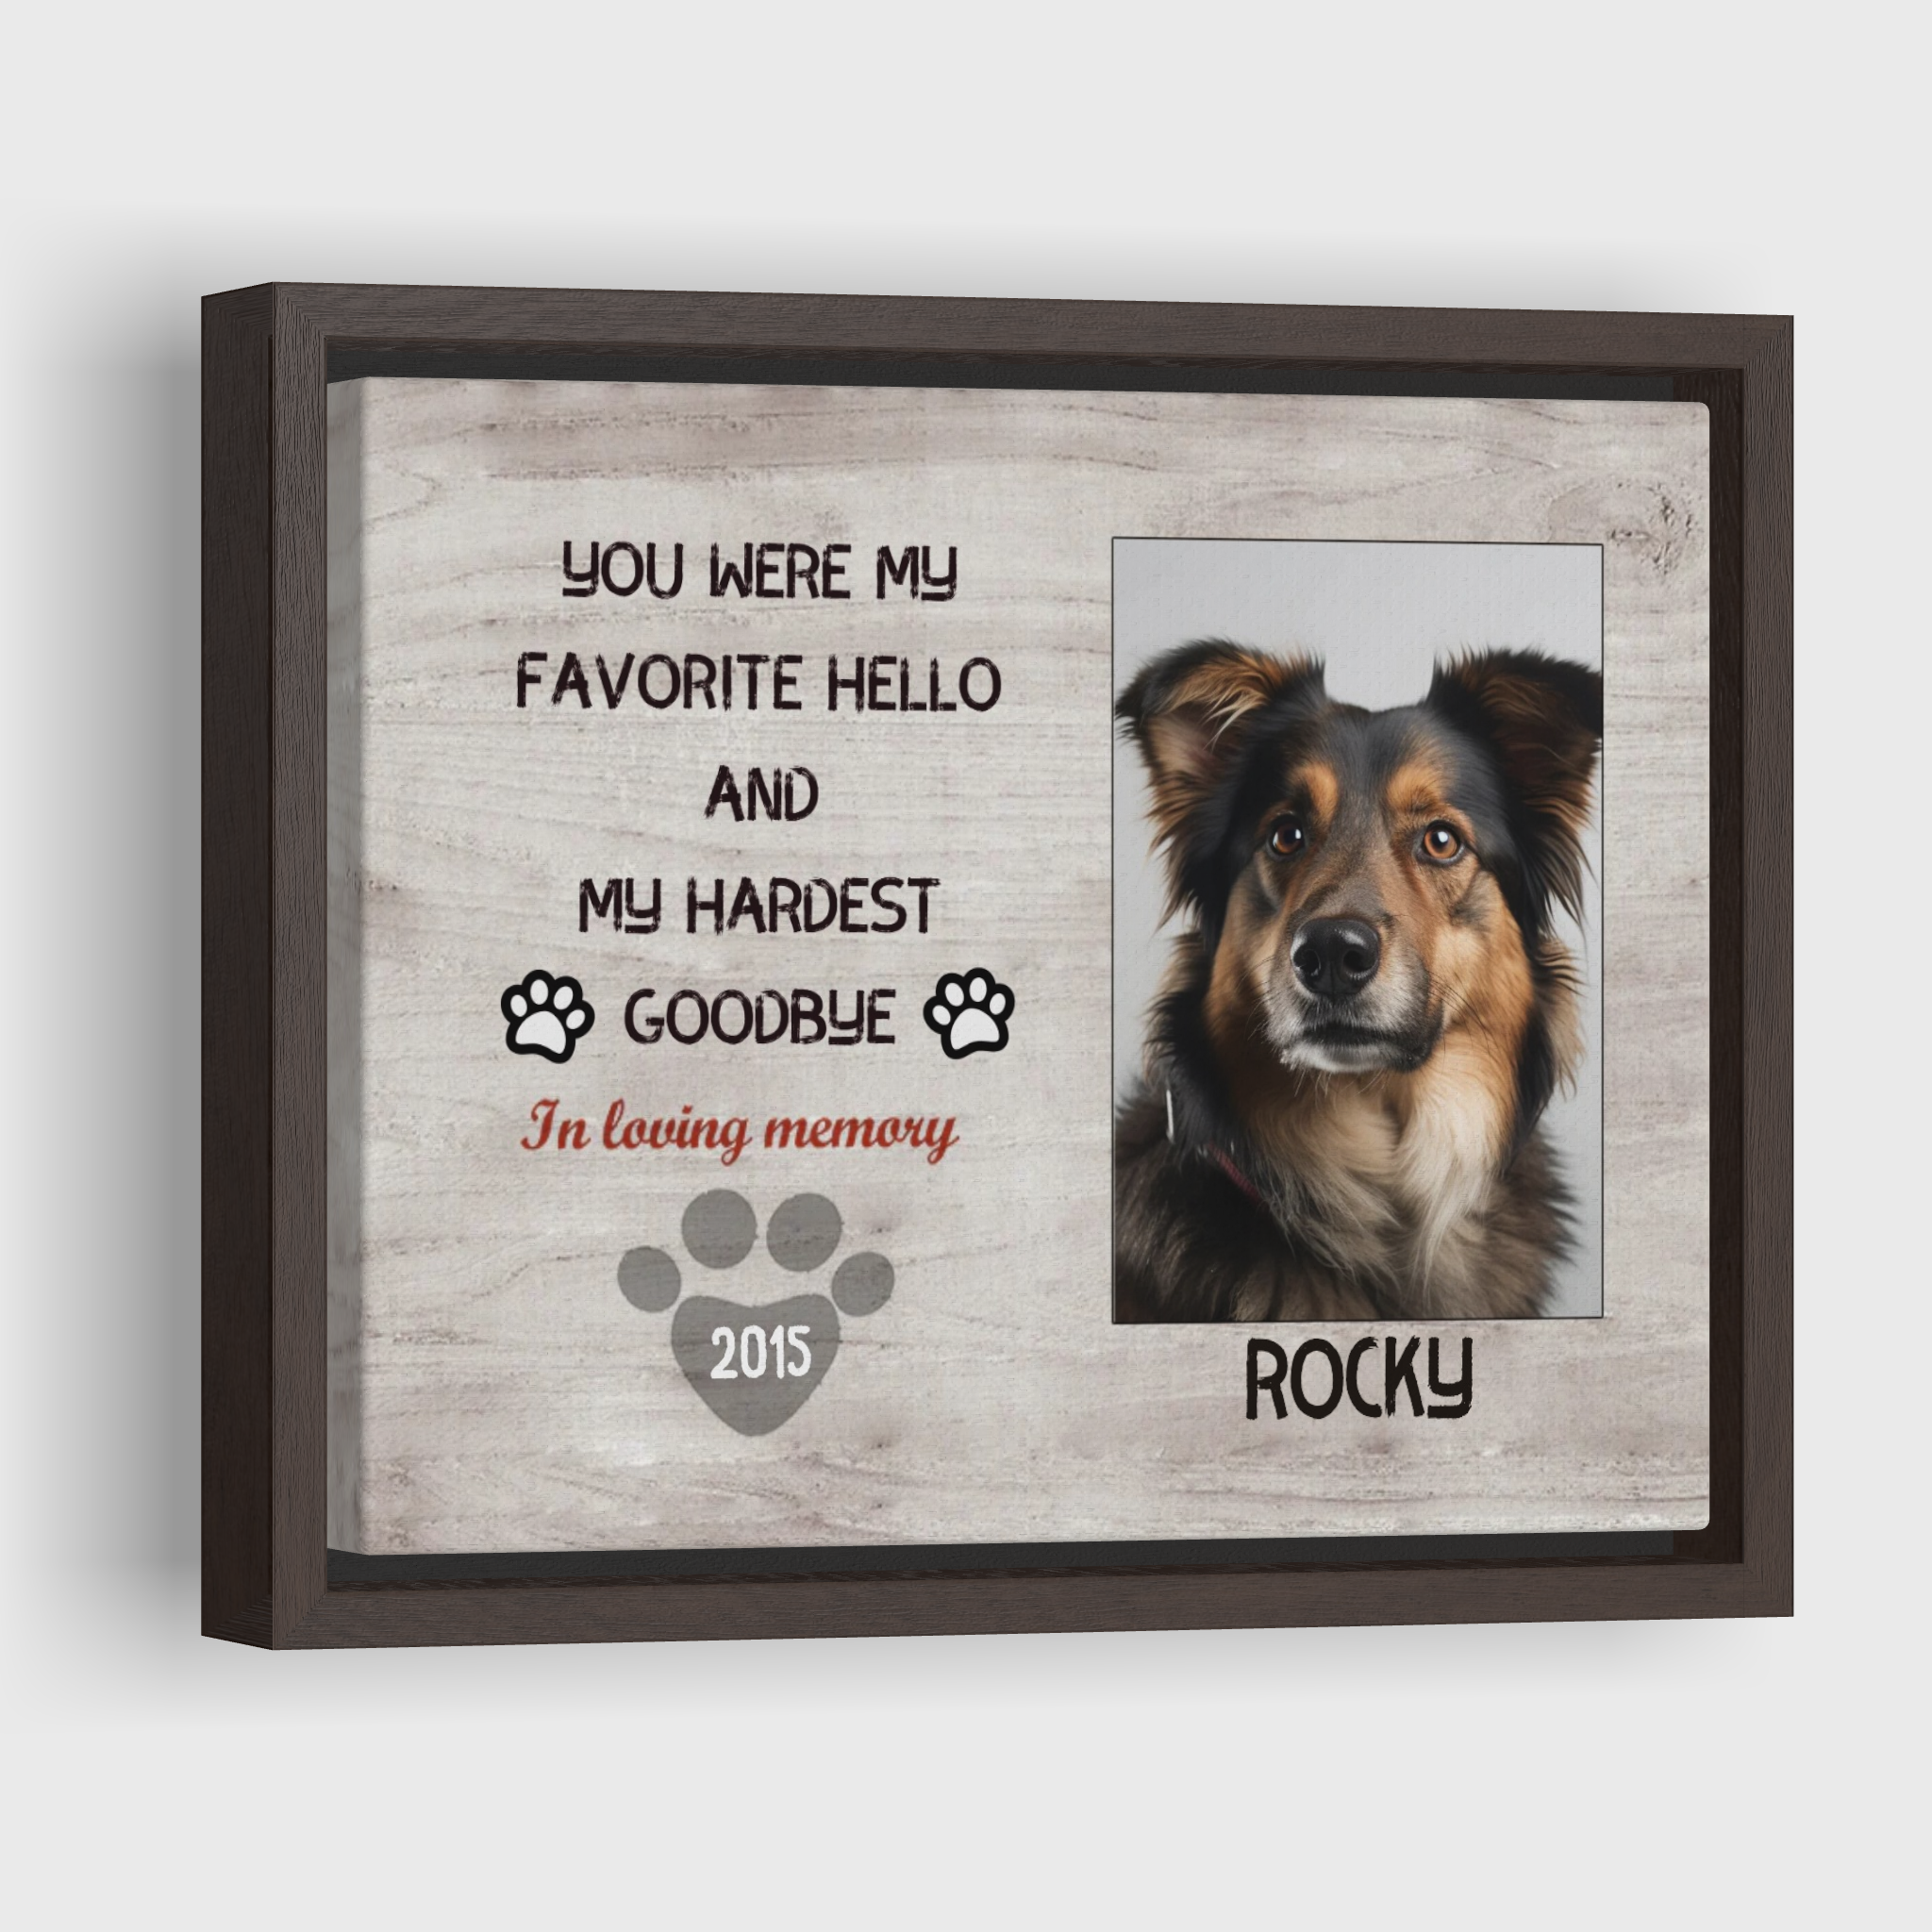 My Hardest Goodbye, Hang and Place - Personalized Pet Memorial Print